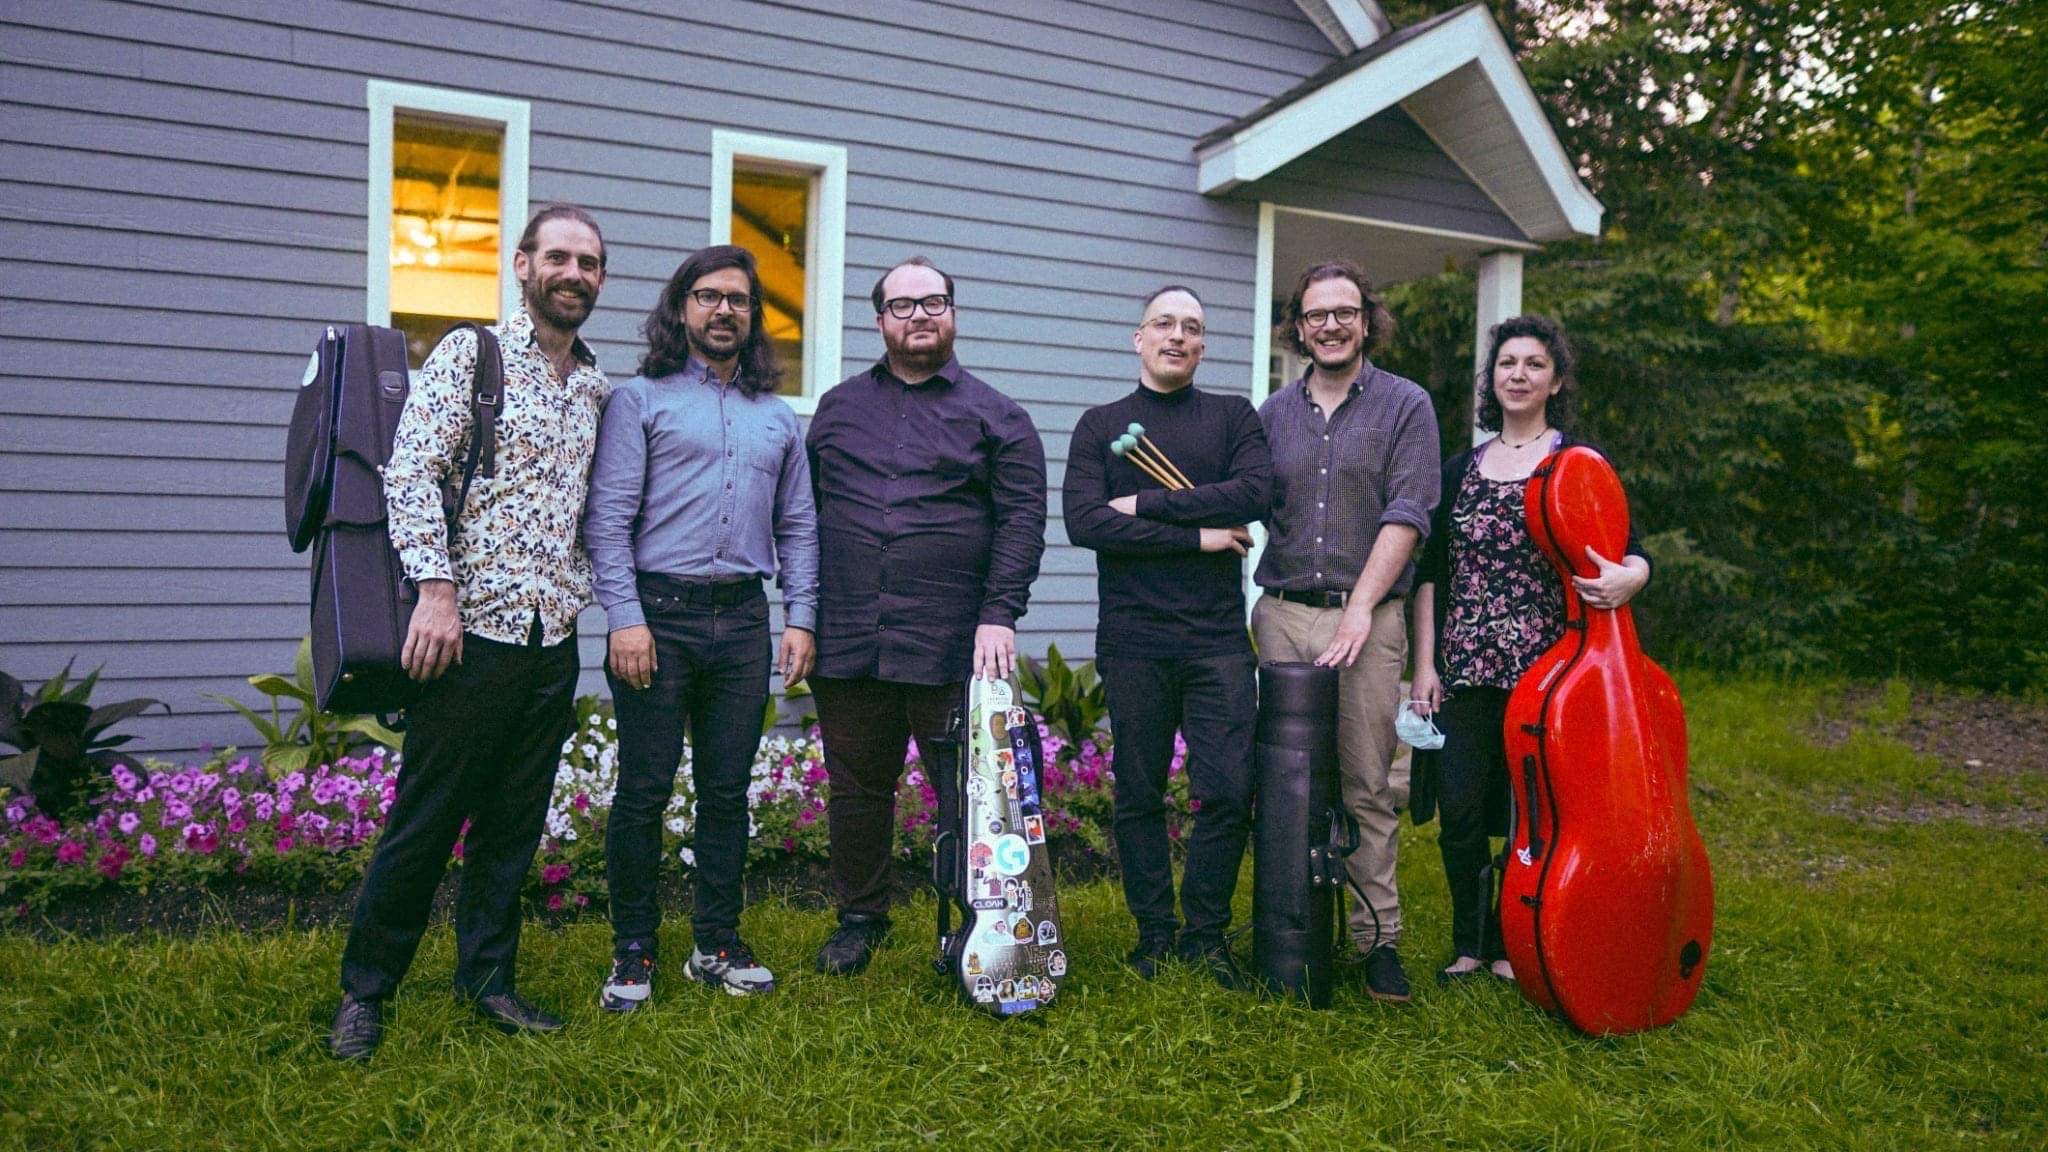 The 6 musicians from Paramirabo, smiling, outside in front of a building on the site of the musical camp. From left to right: Victor Alibert, Daniel Añez, Hubert Brizard, David Therrien-Brongo, Jeff Stonehouse and Viviana Gosselin.